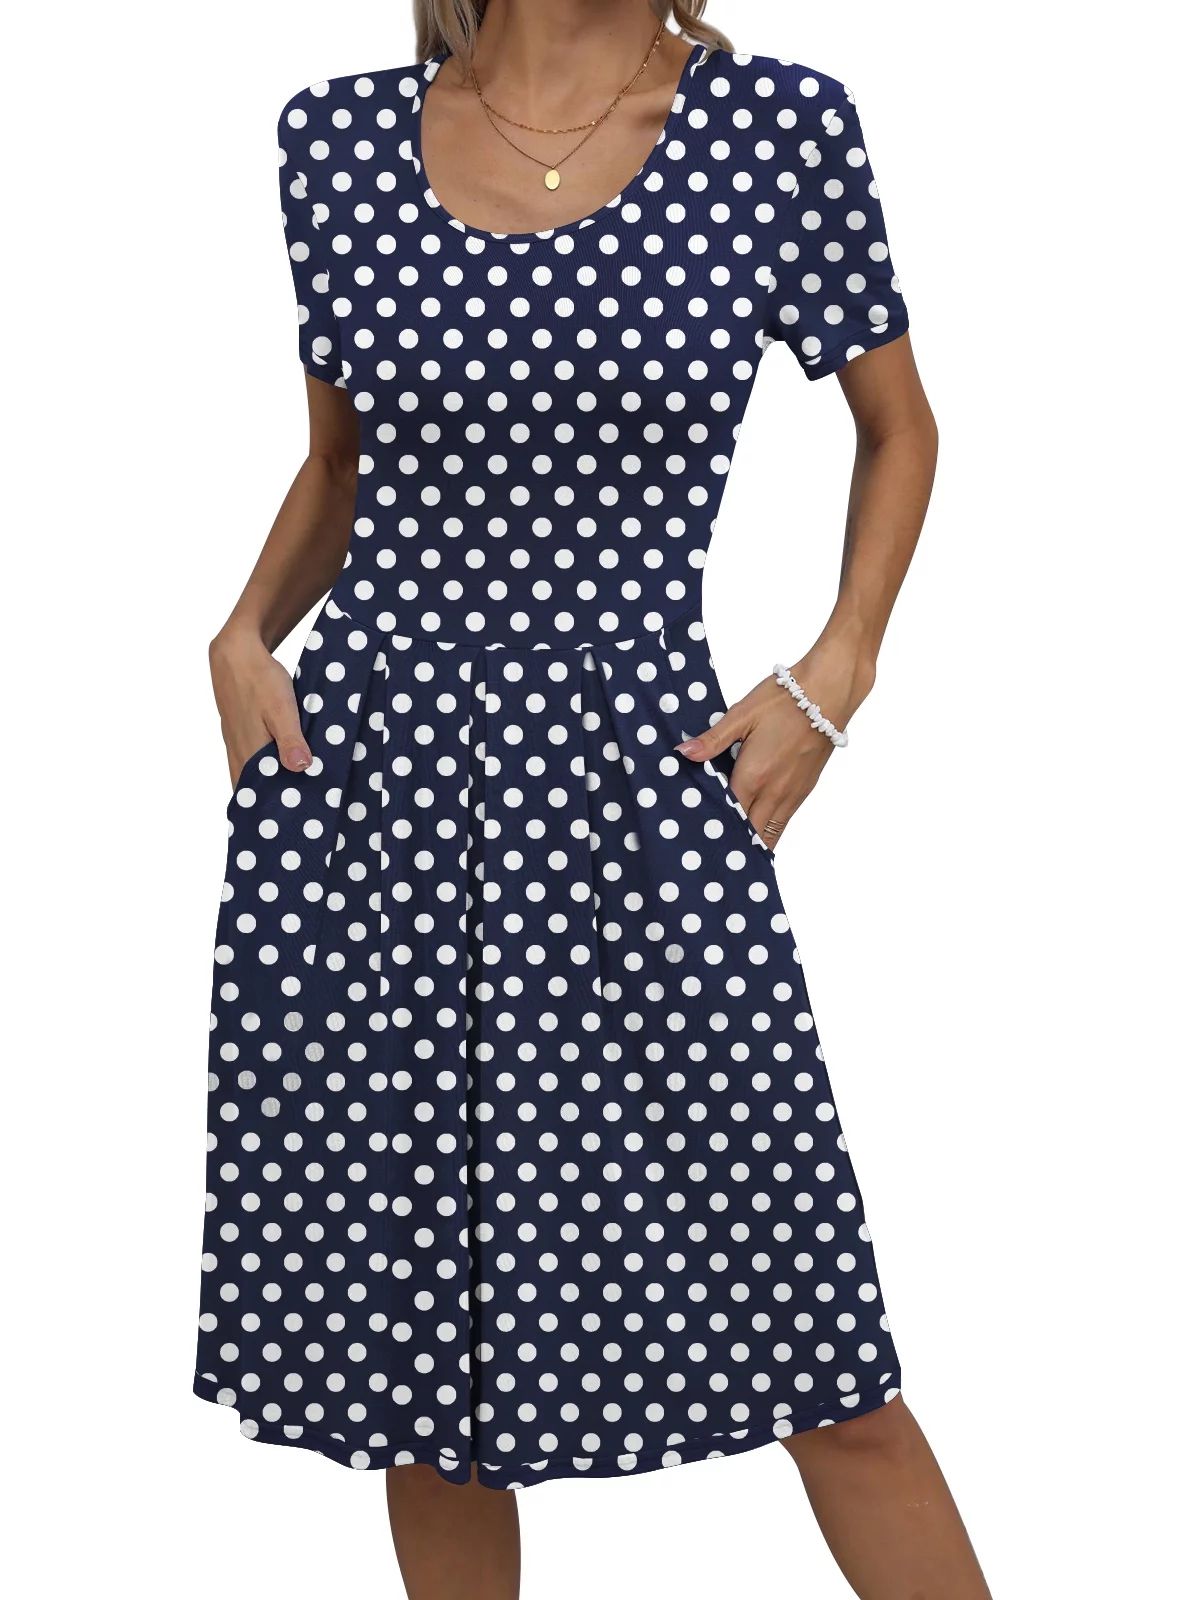 Mengpipi Dresses for Women Summer Casual Crew Neck Loose Flowy with Pockets, Polka Dots-S(US 4-6)... | Walmart (US)